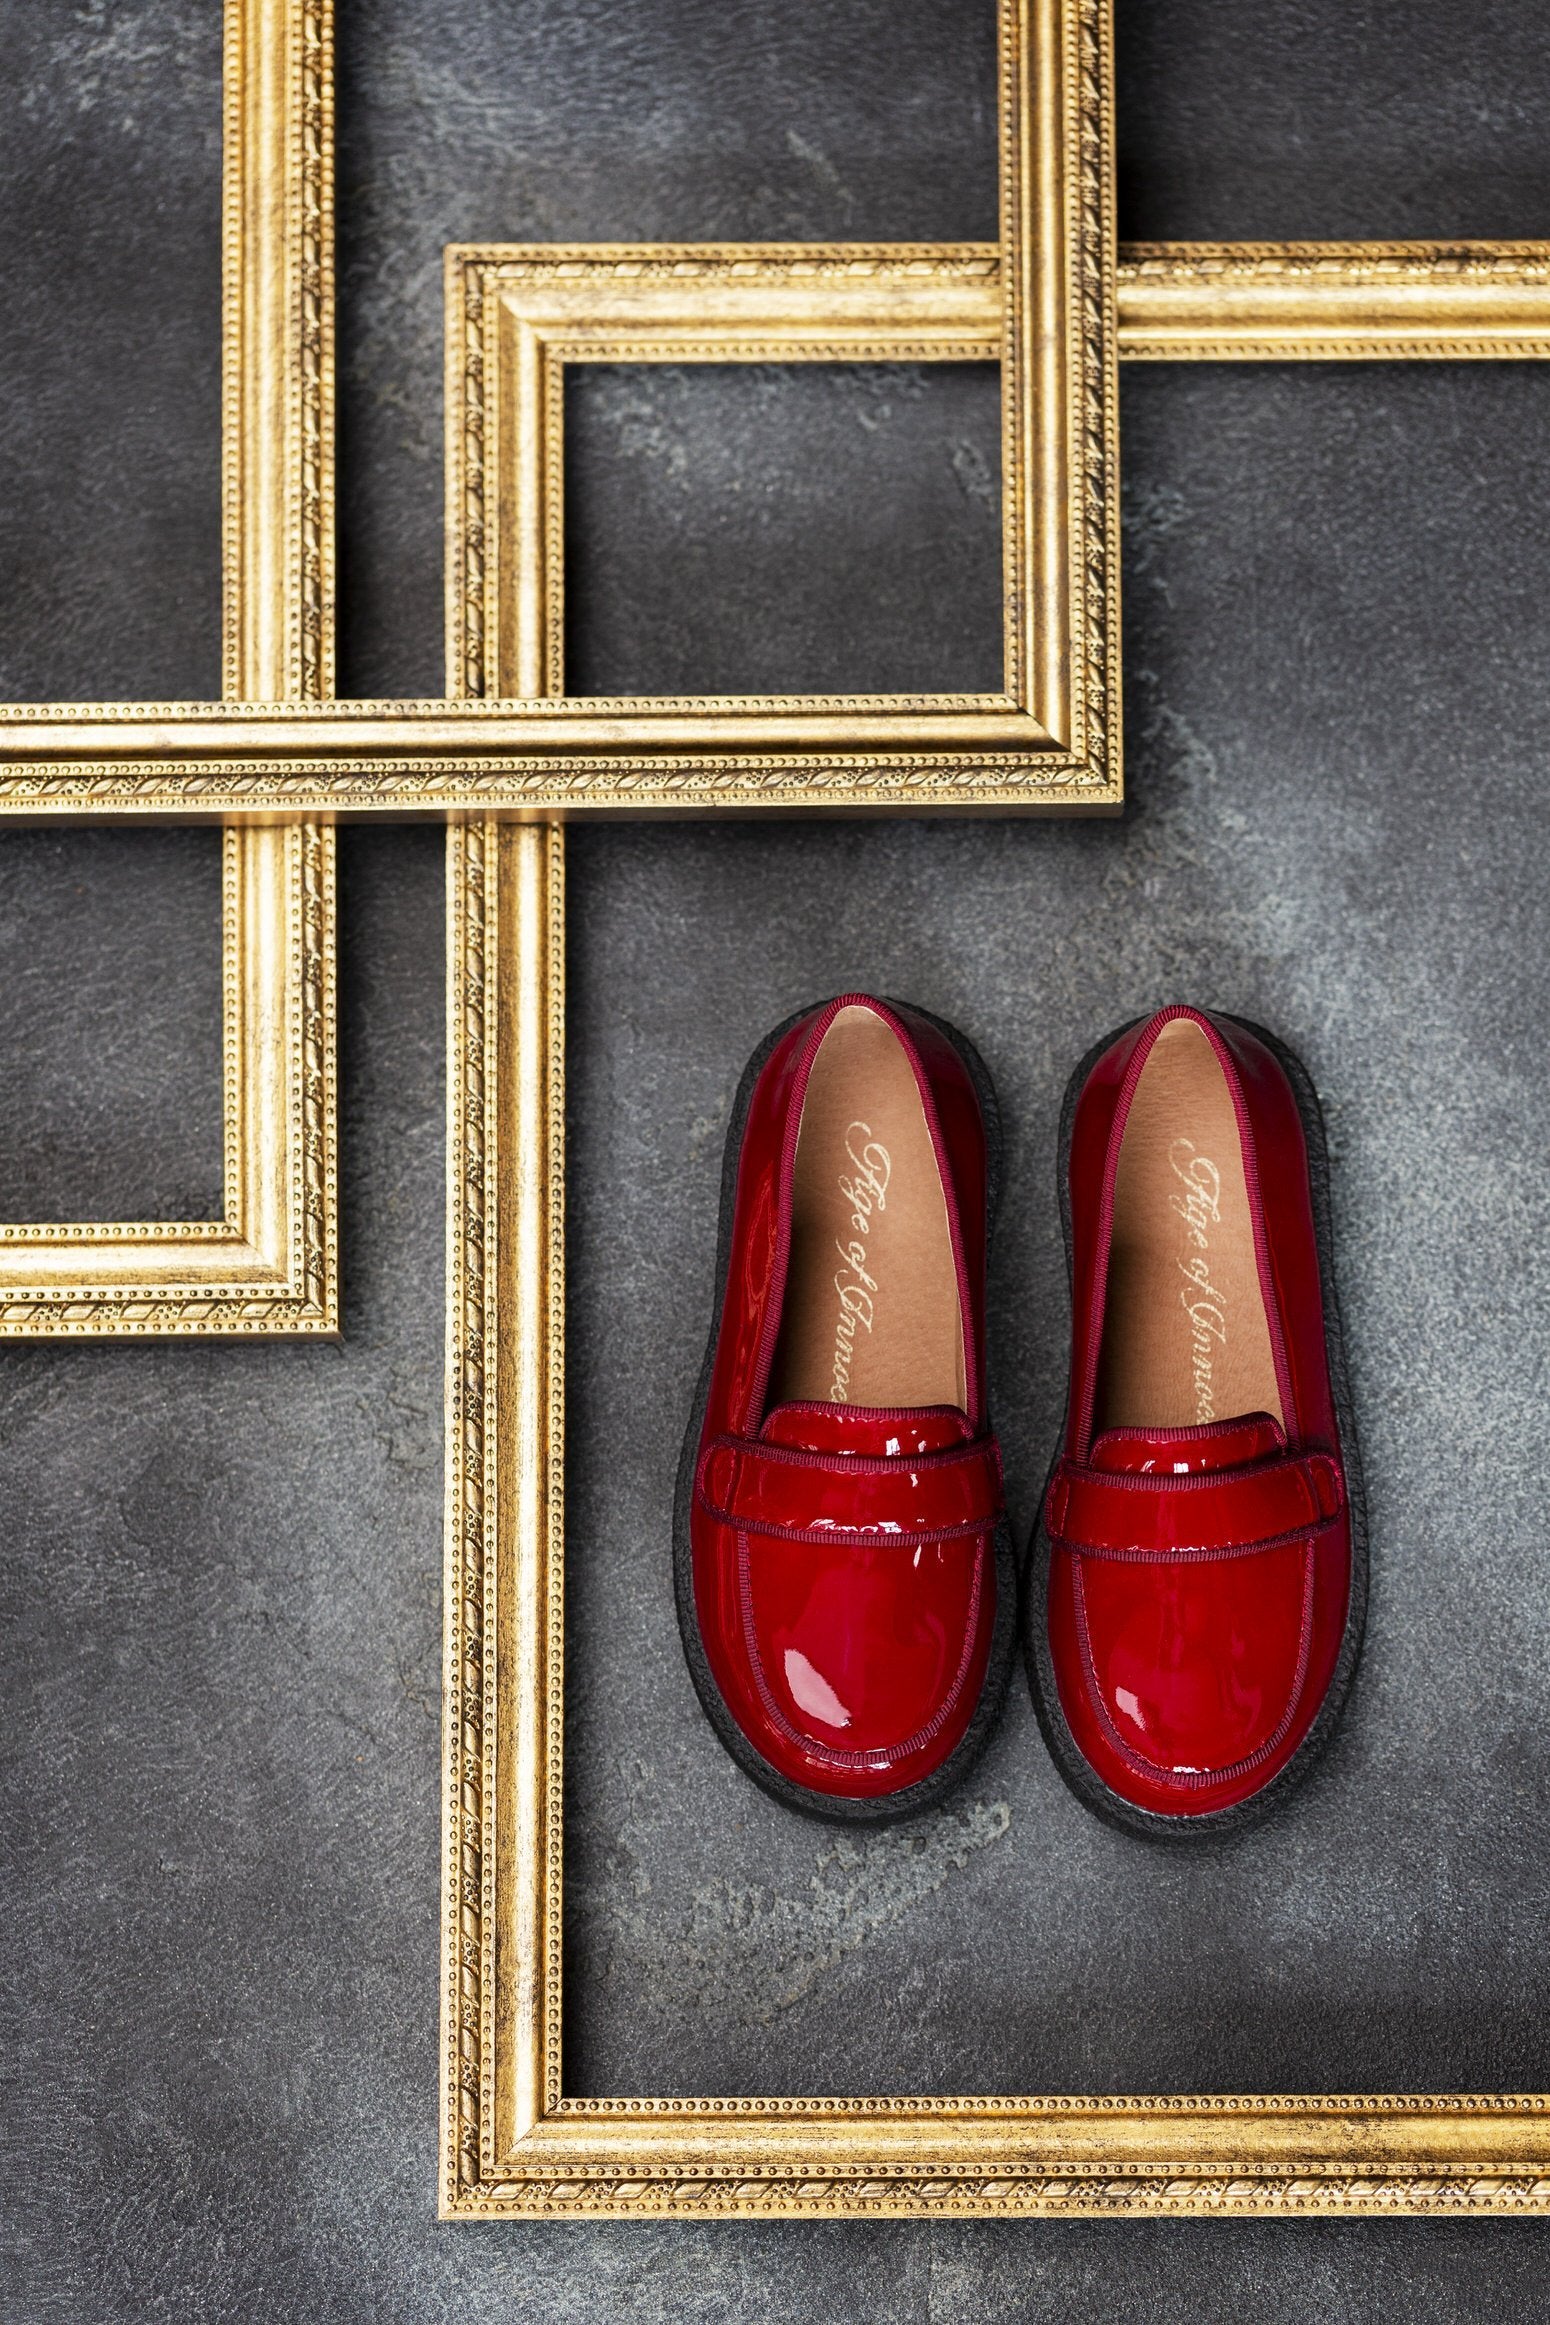 Bobby Burgundy Loafers by Age of Innocence